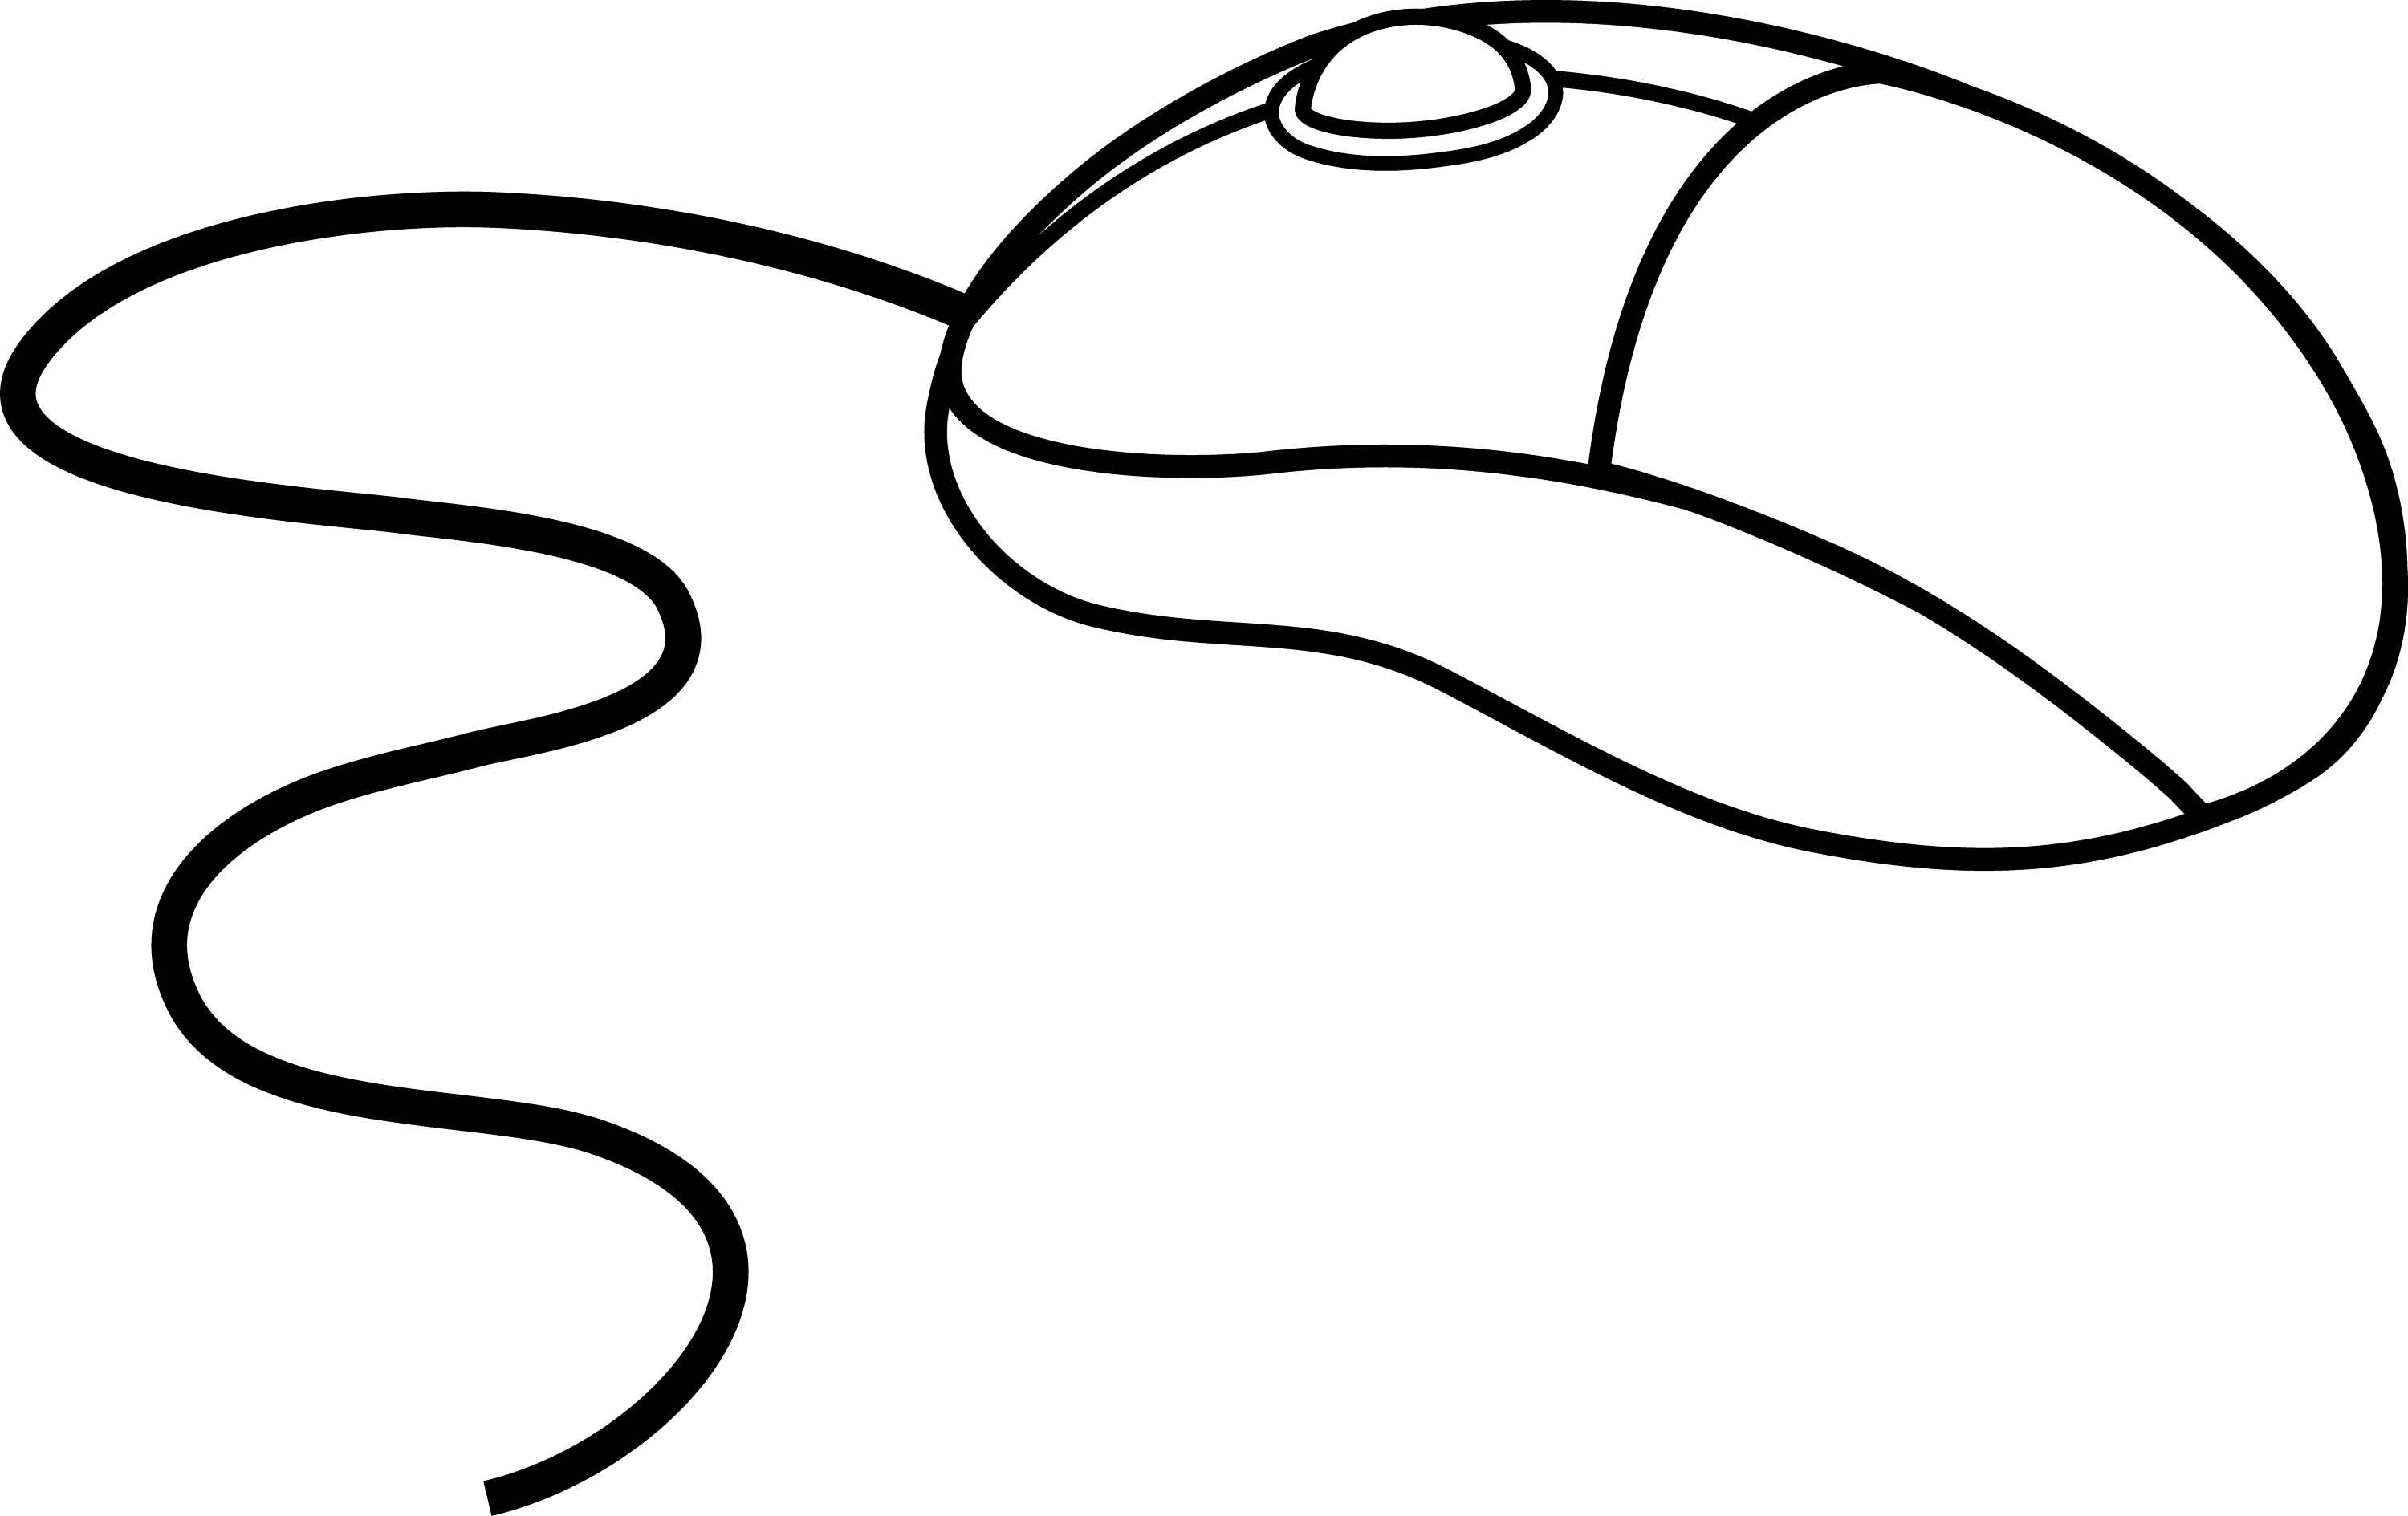 computer mouse clipart black and white - photo #2